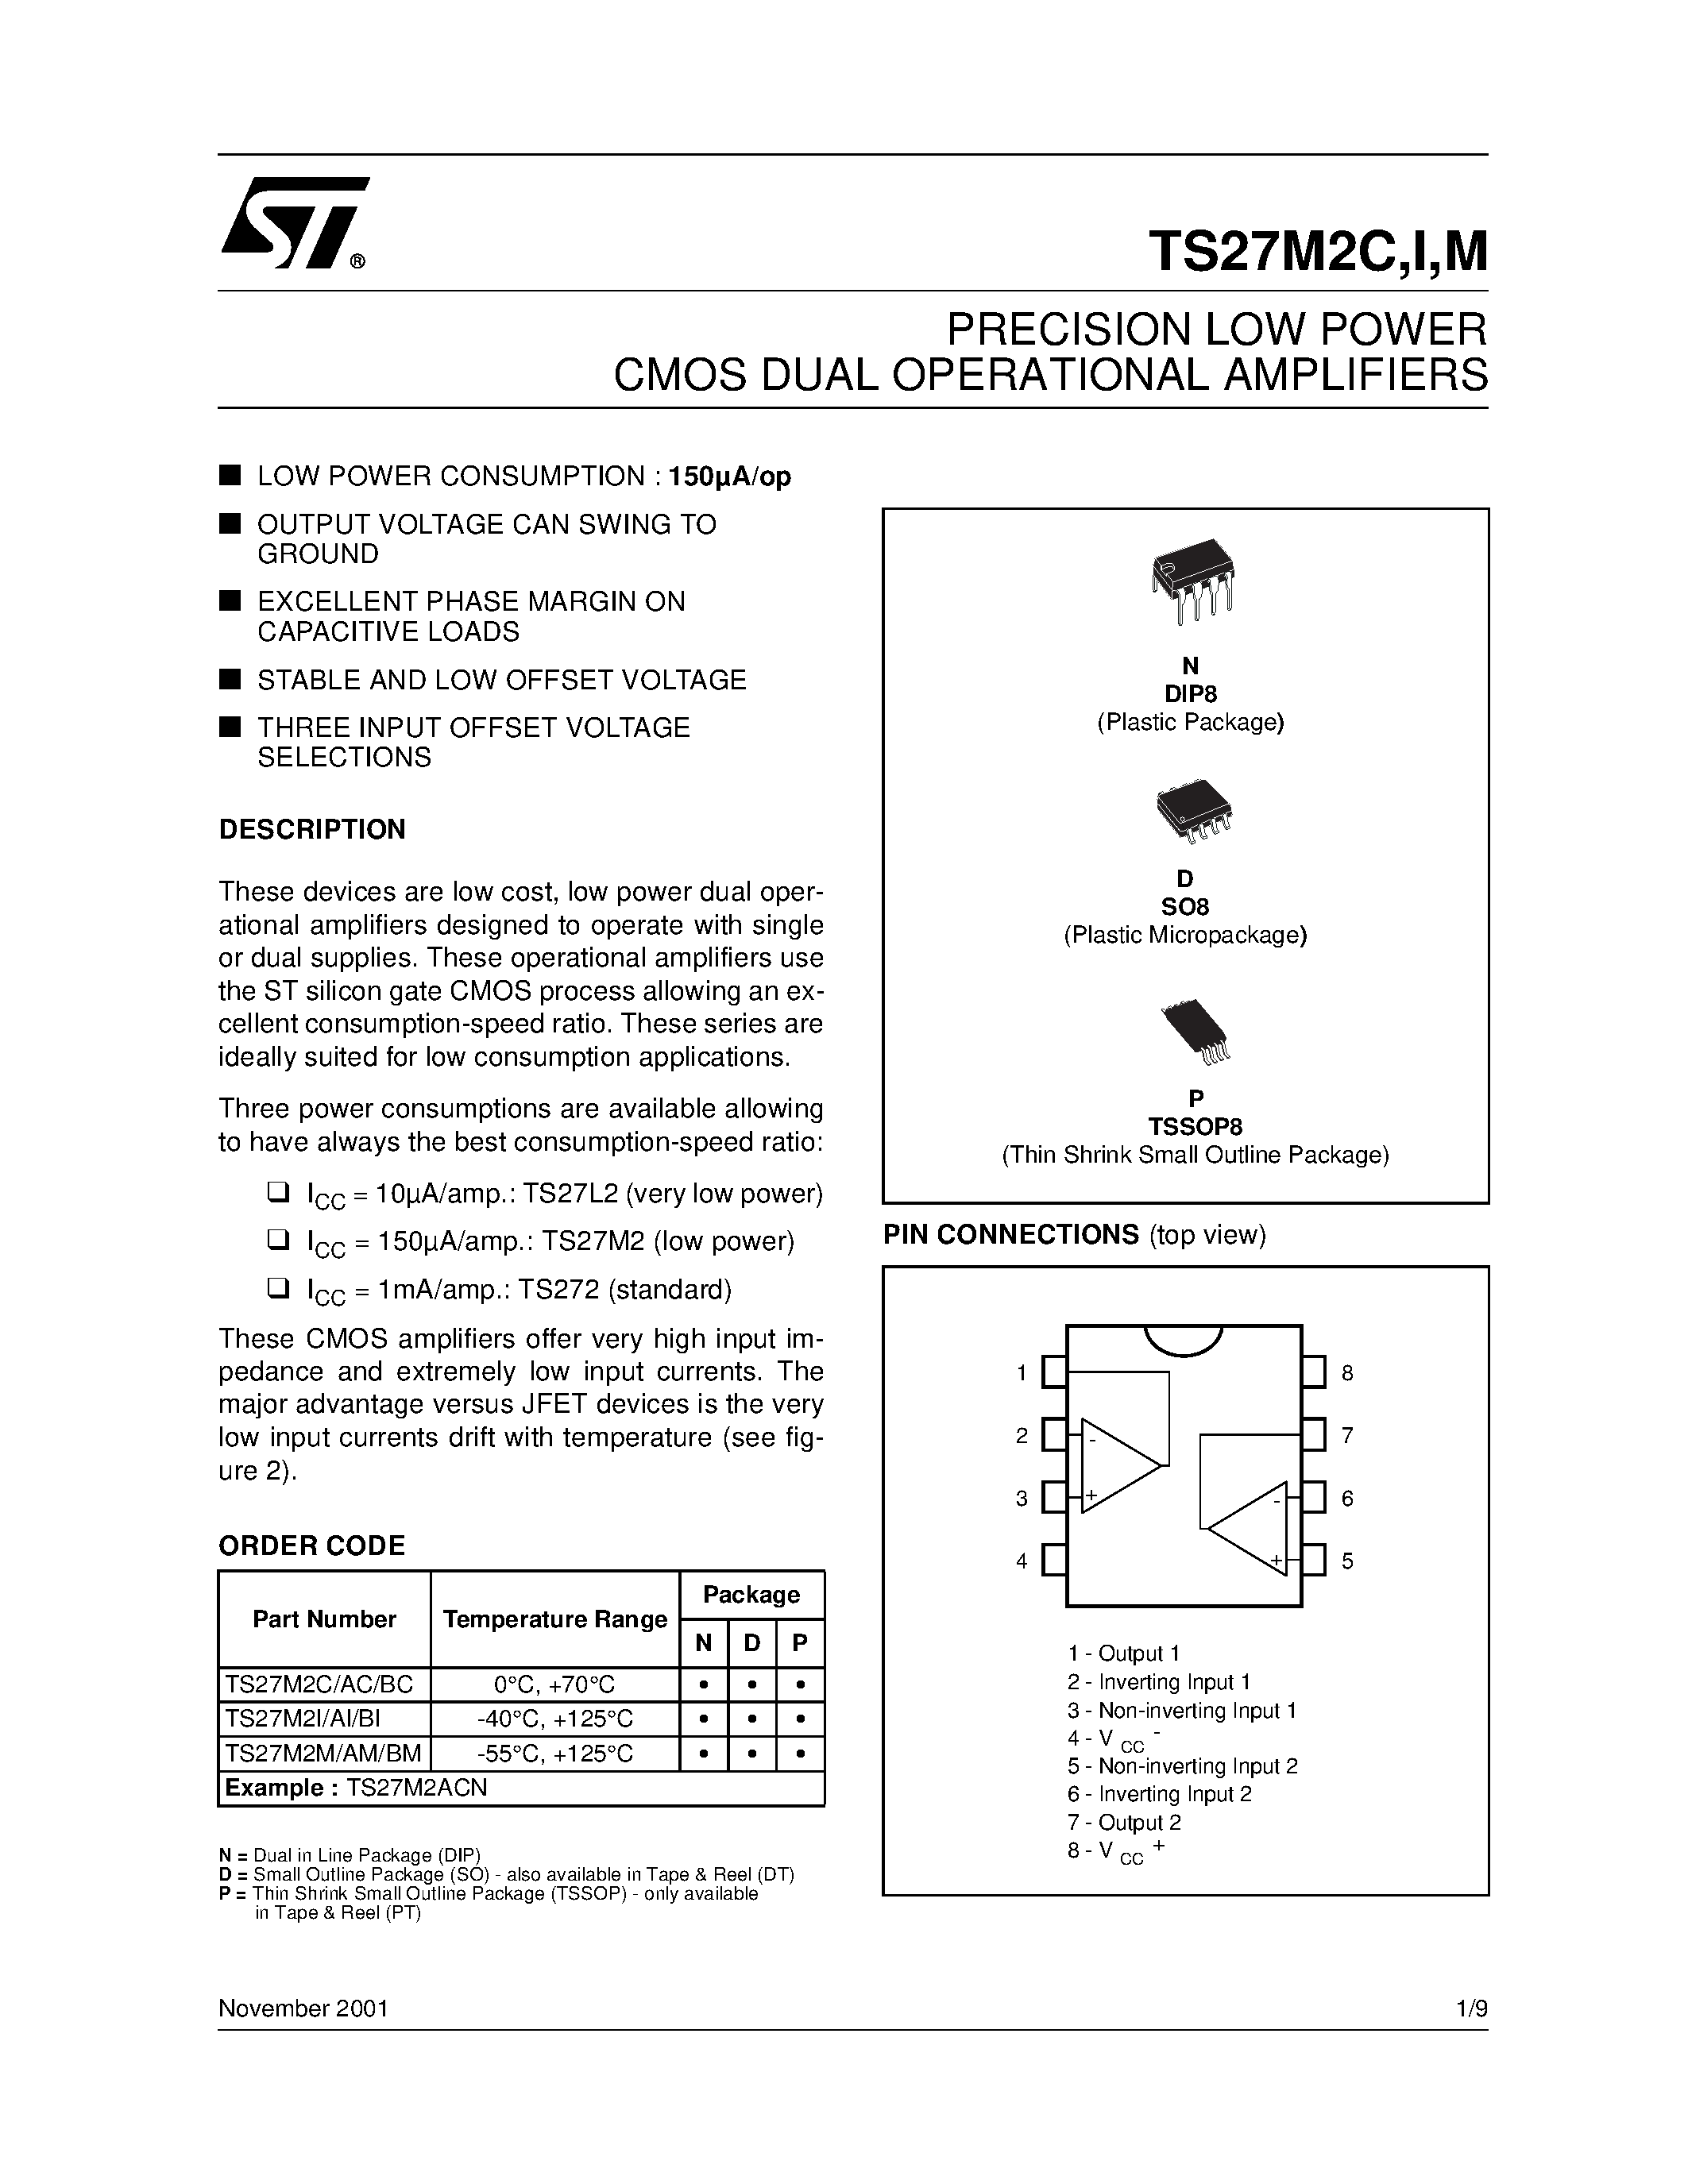 Datasheet TS27M2M - PRECISION LOW POWER CMOS DUAL OPERATIONAL AMPLIFIERS page 1